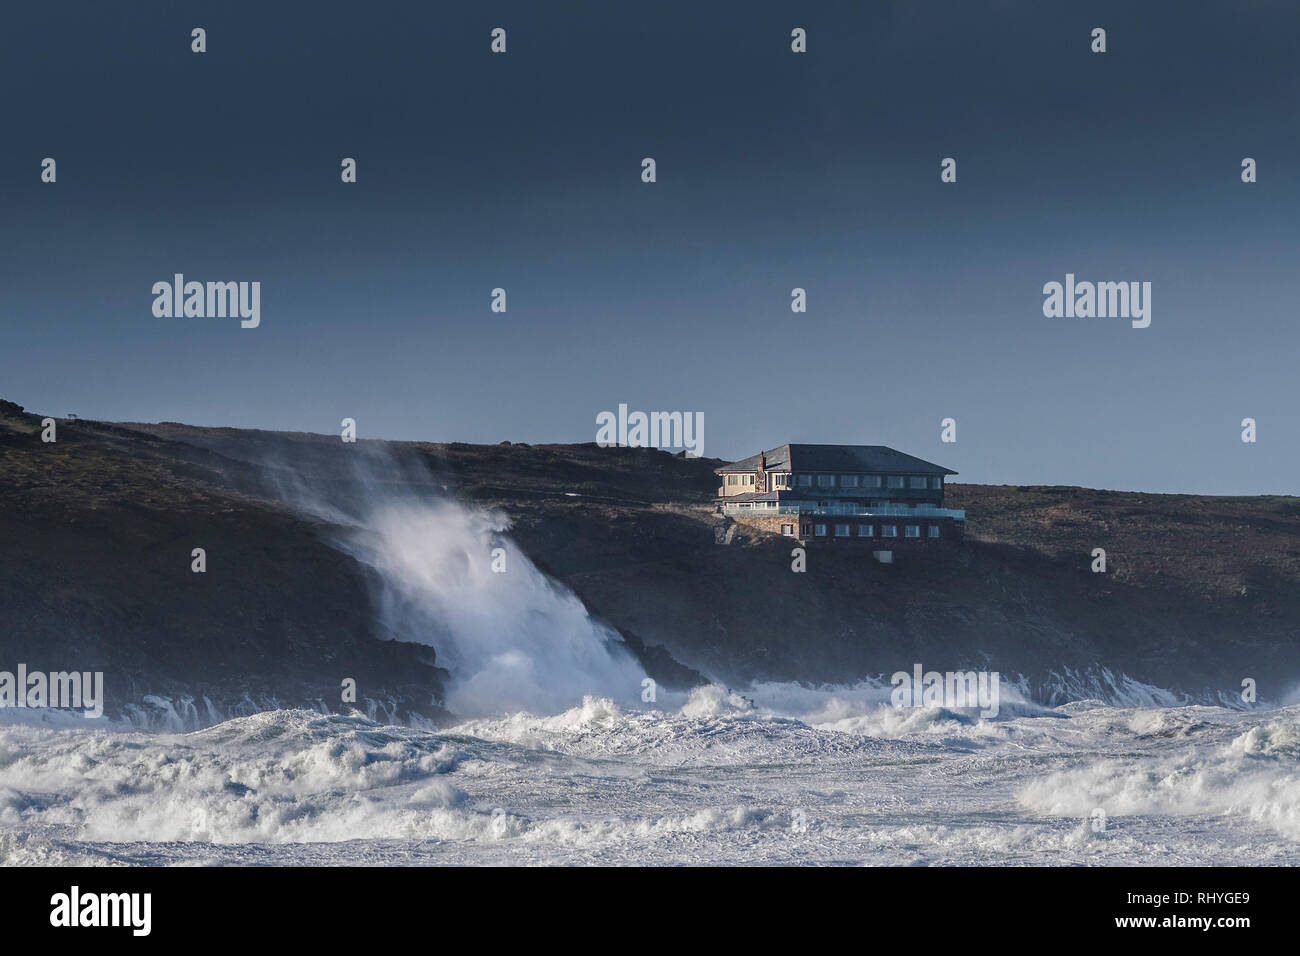 The Lewinnick Lodge overlooking the sea as winter storm waves break into the cliffs below. Stock Photo